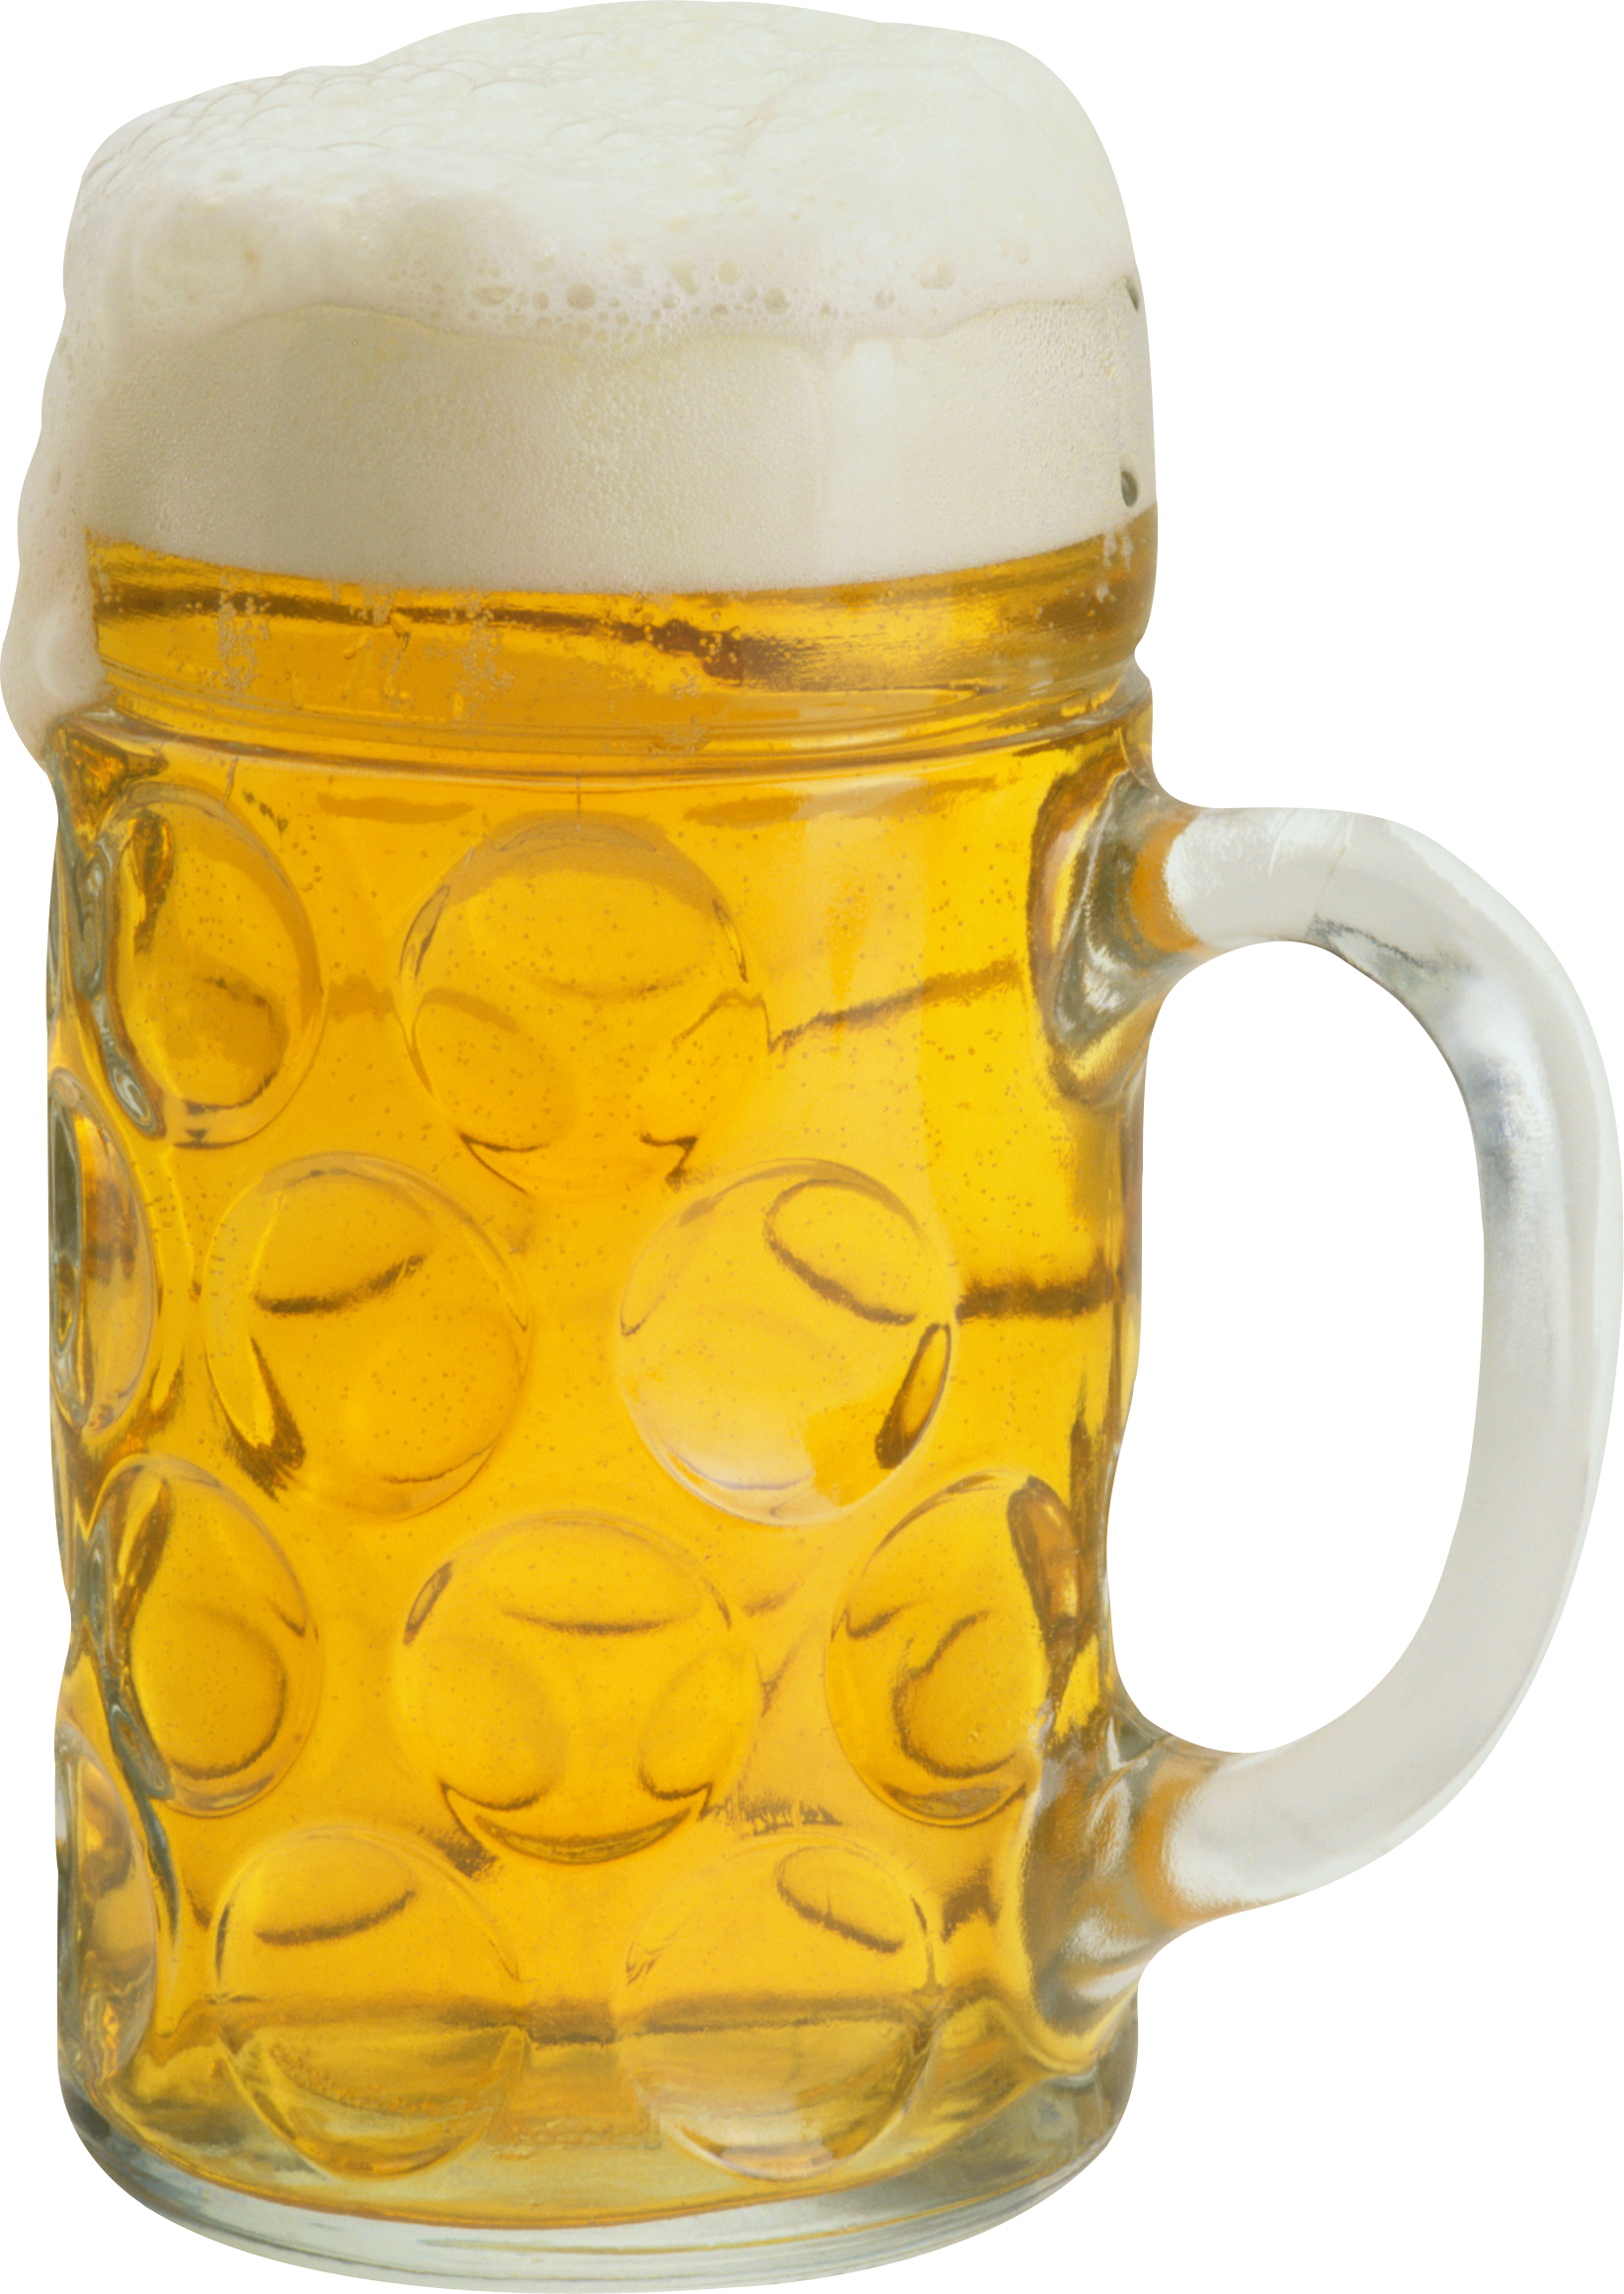 Ice Cold Beer in Mug PNG Image